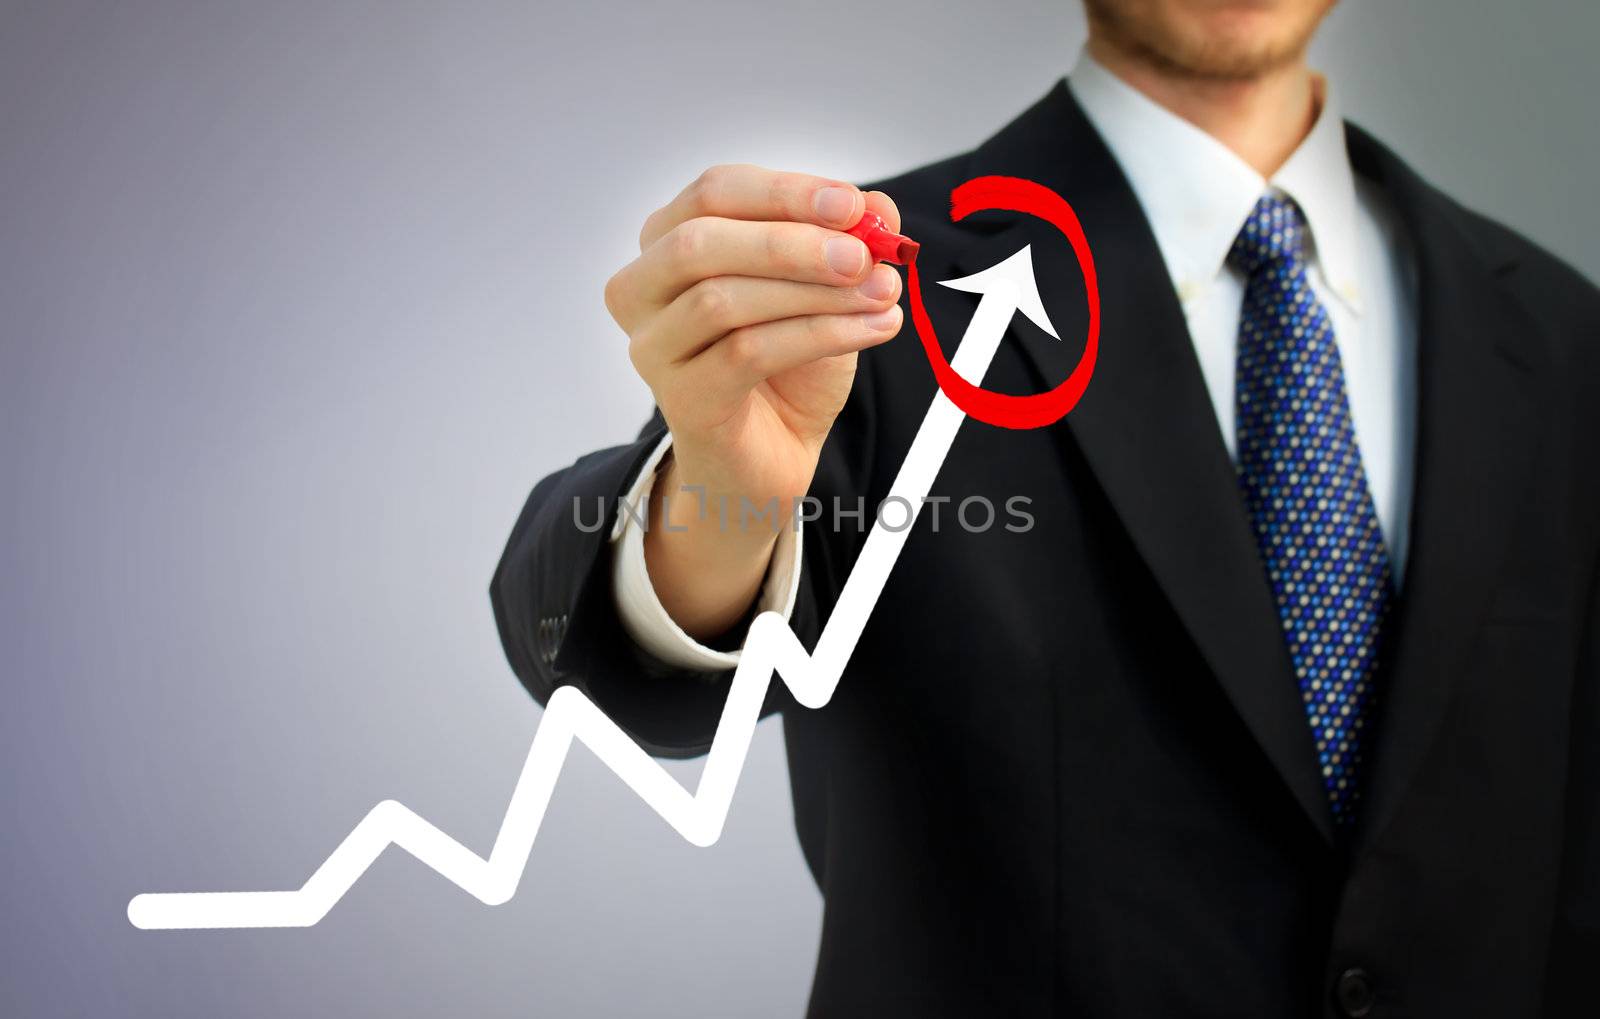 Businessman highlighting business growth on a graph